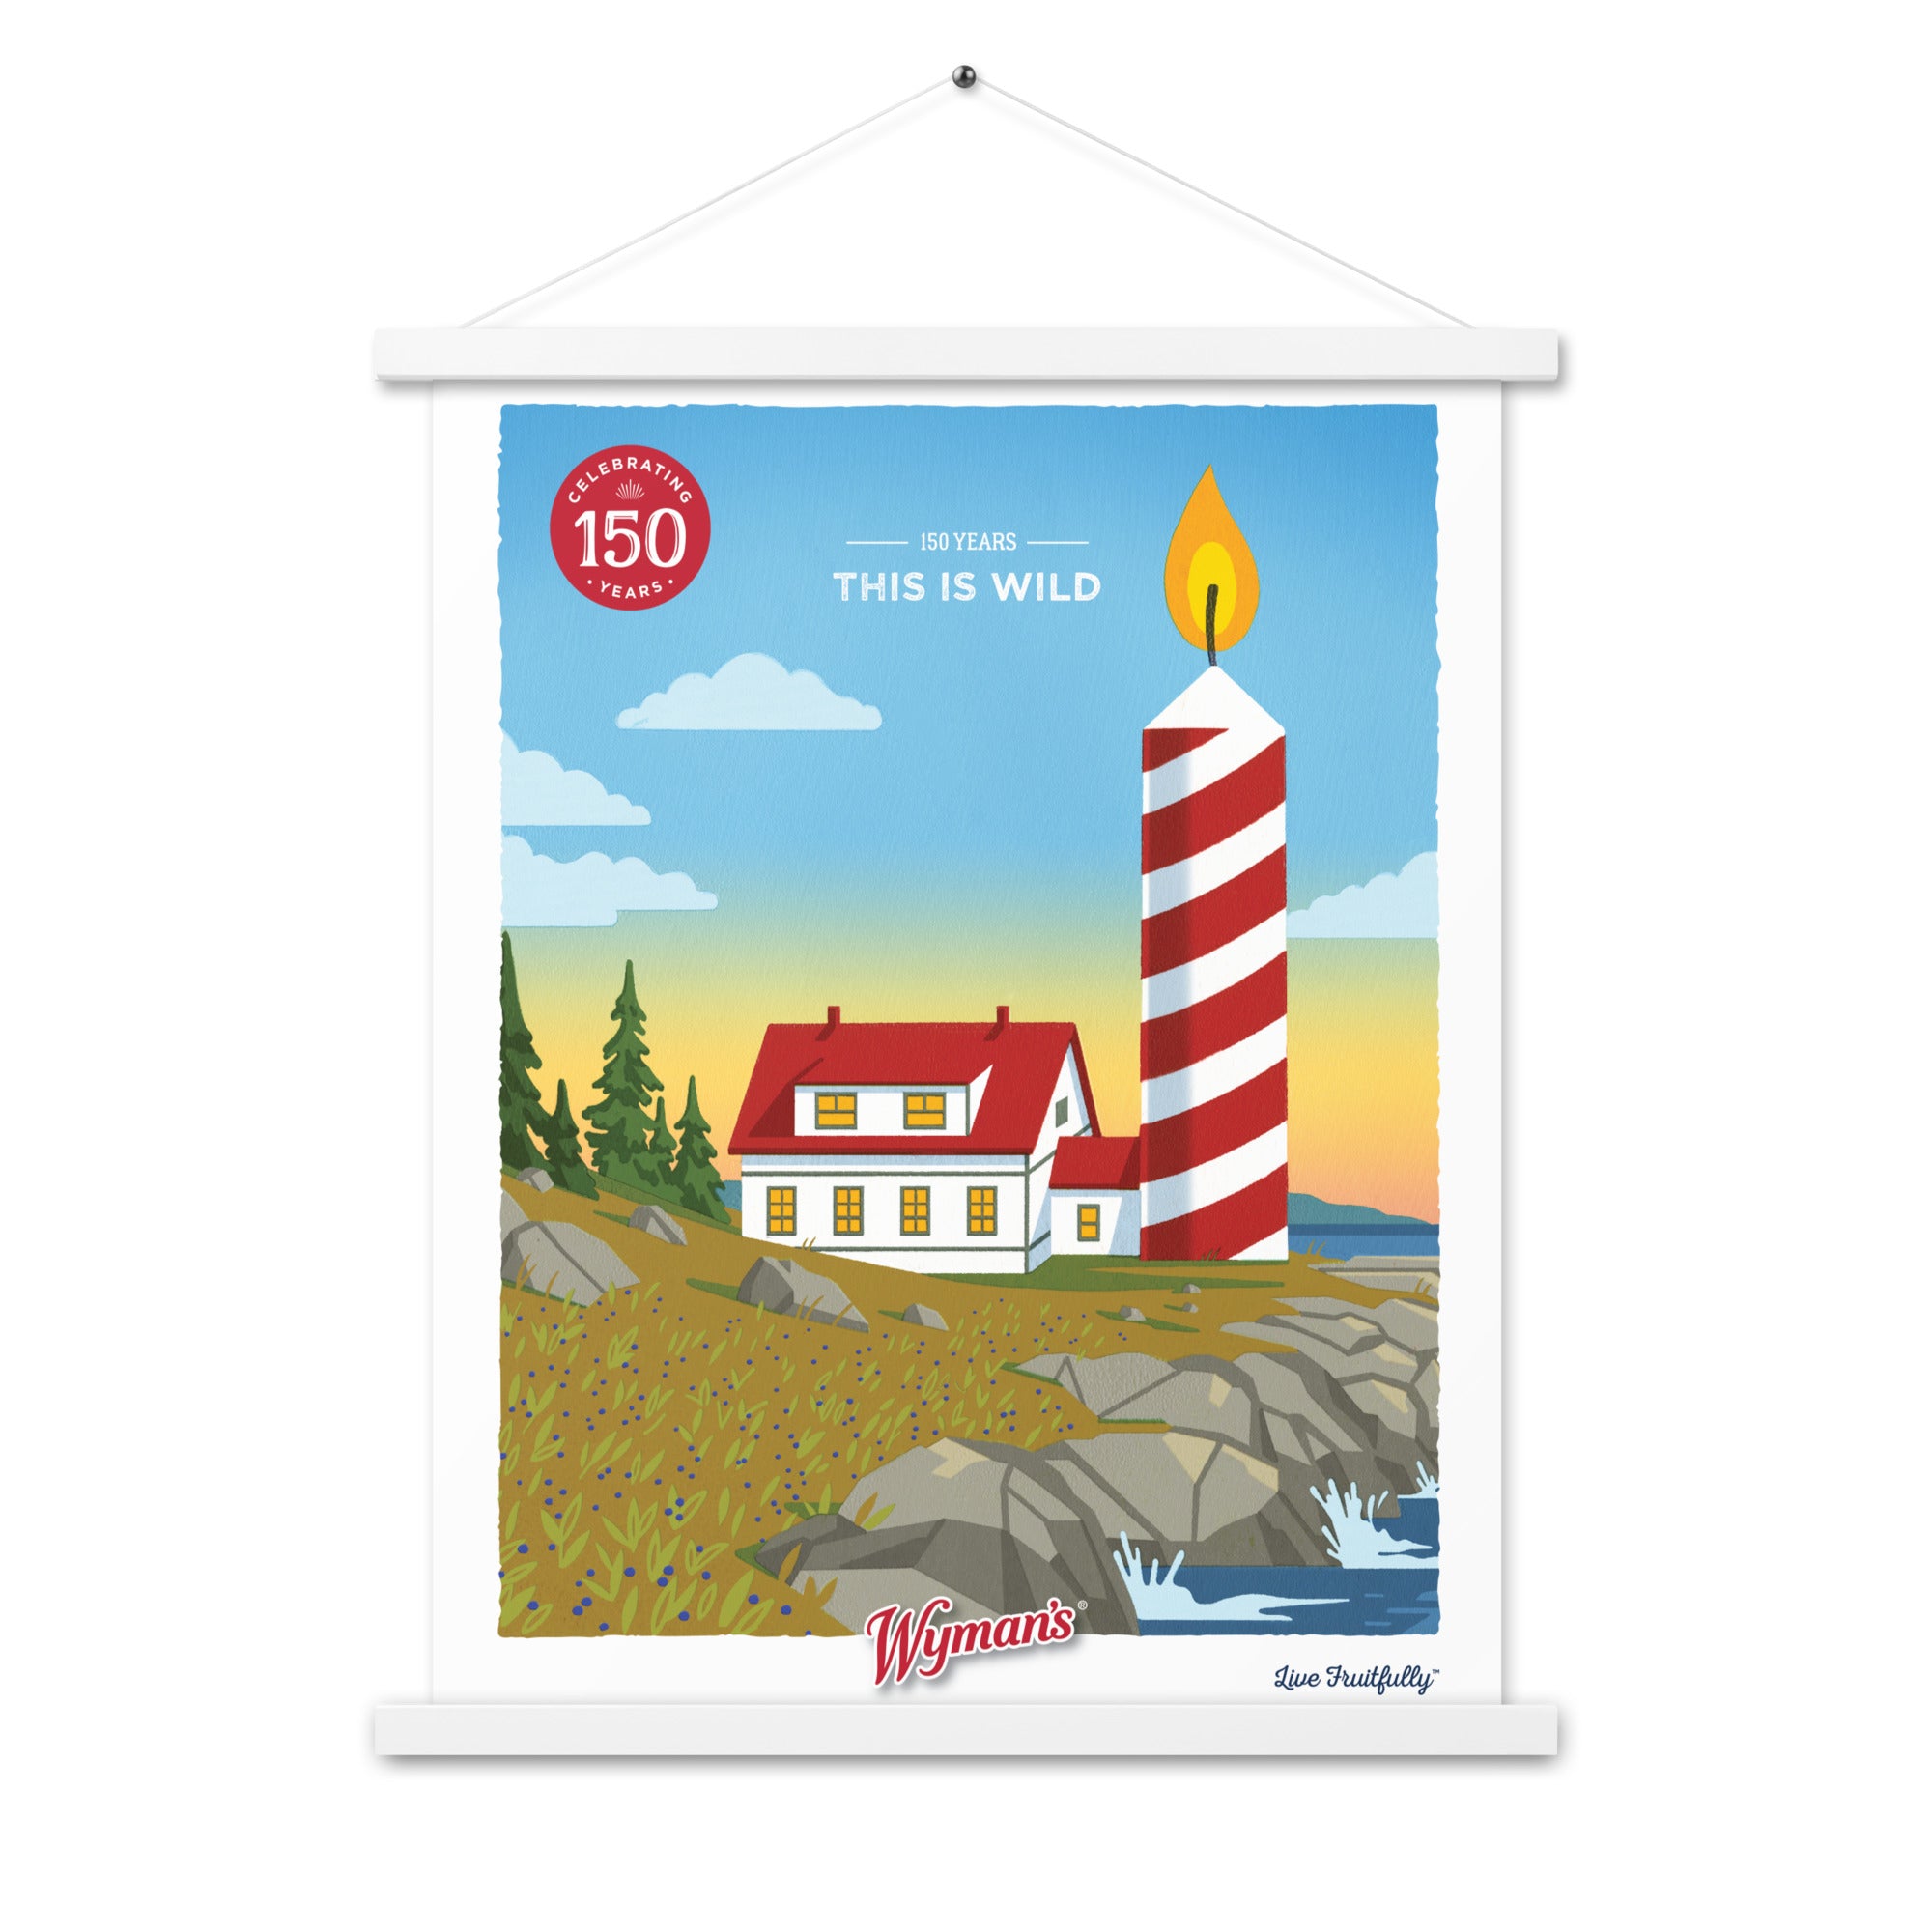 A custom Shop Wyman's poster with a lighthouse and a candle hanging on the wall.